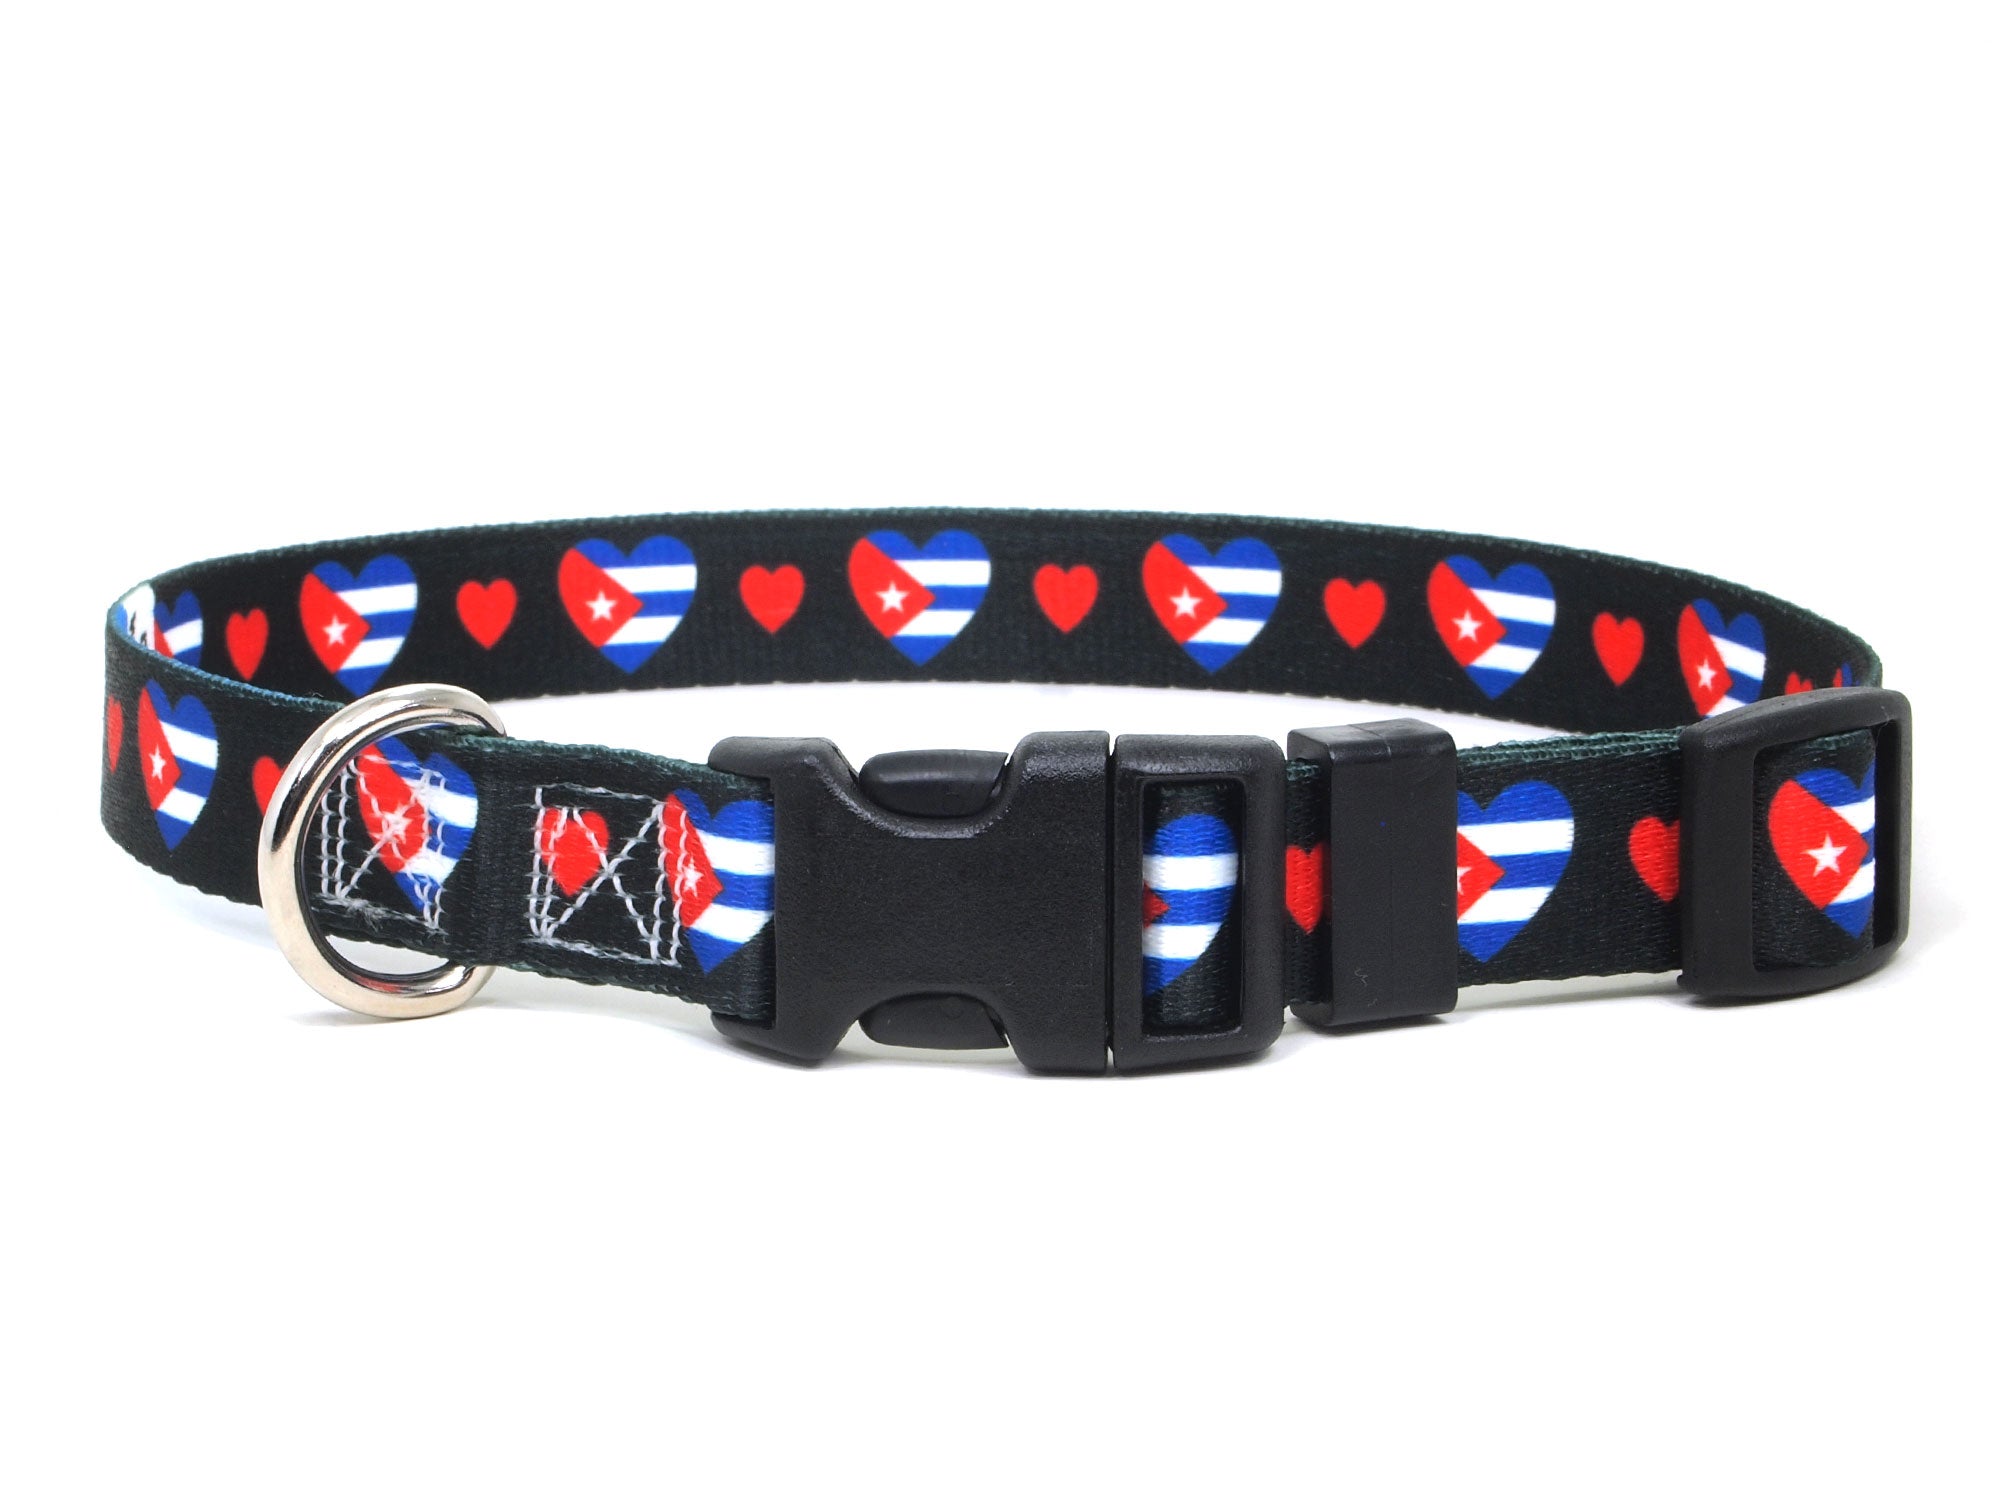 Dog Collar with Cuba Hearts Pattern in black